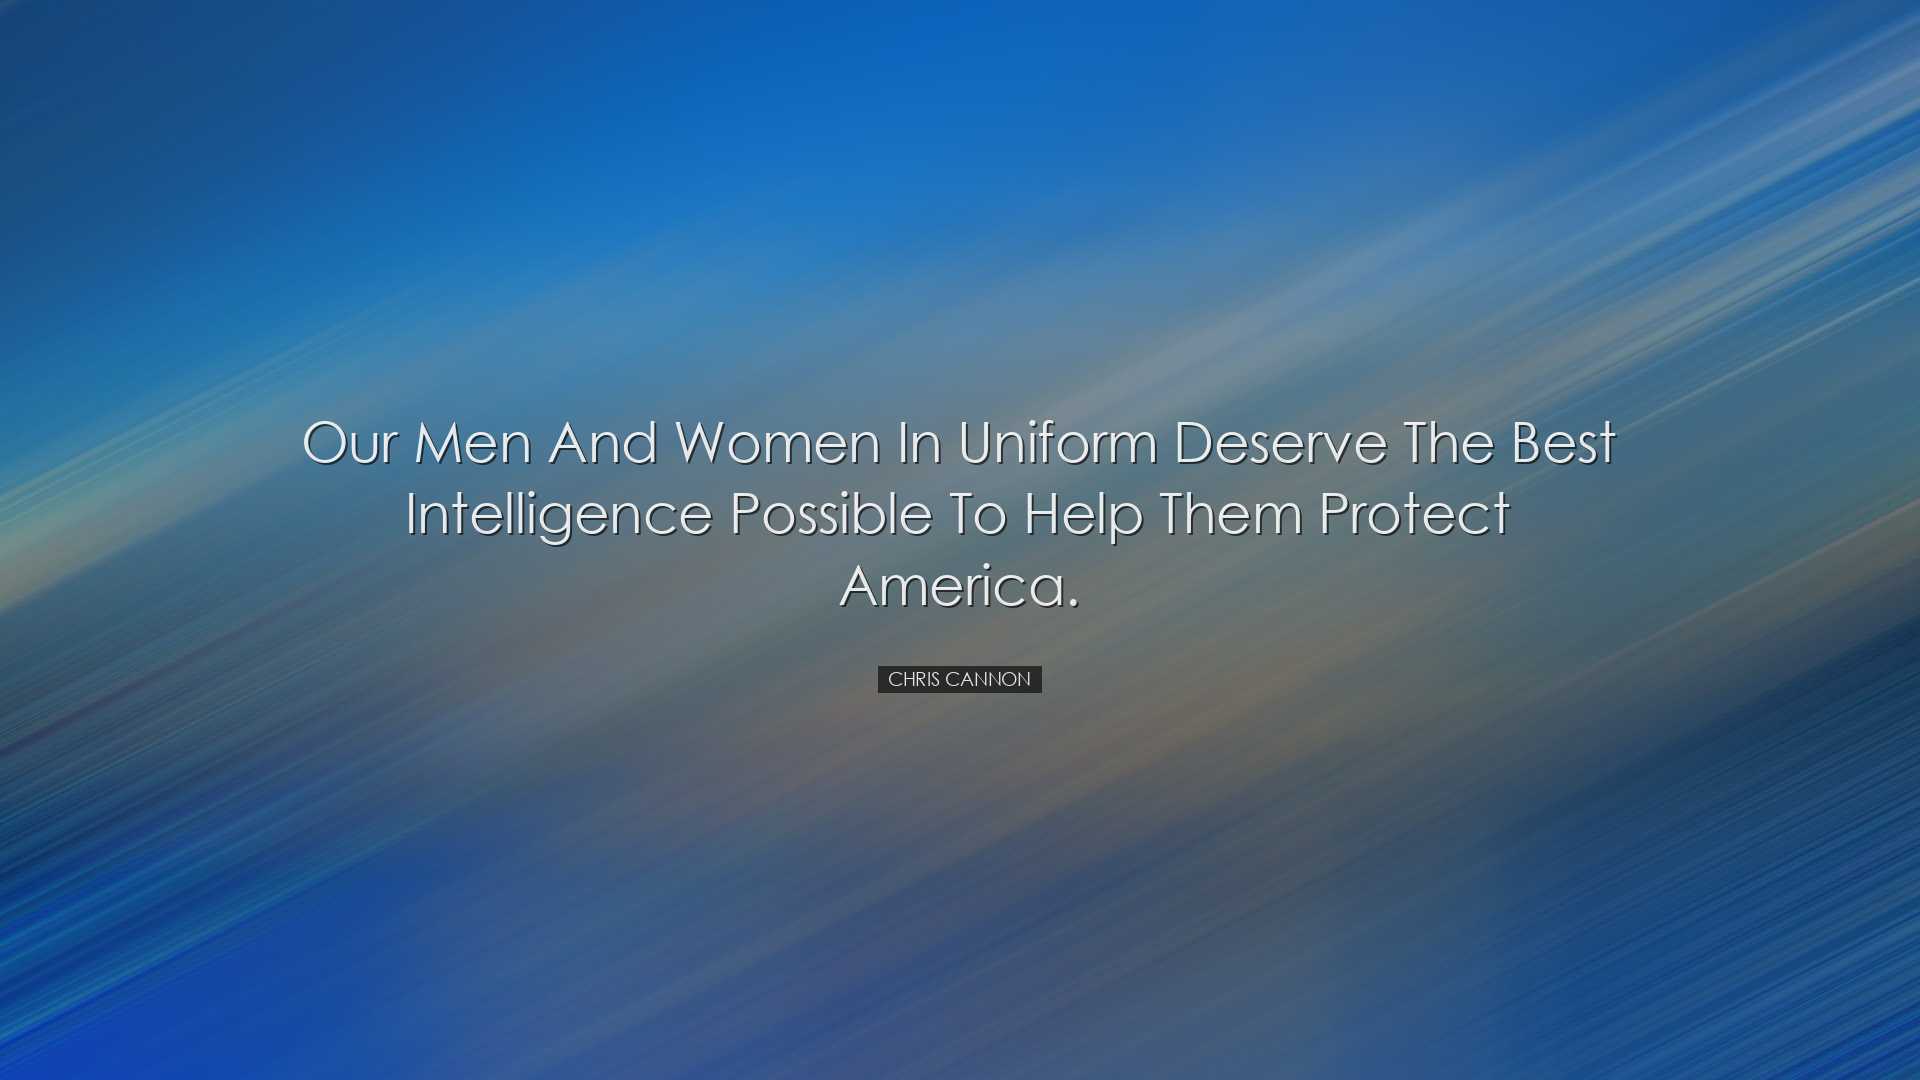 Our men and women in uniform deserve the best intelligence possibl